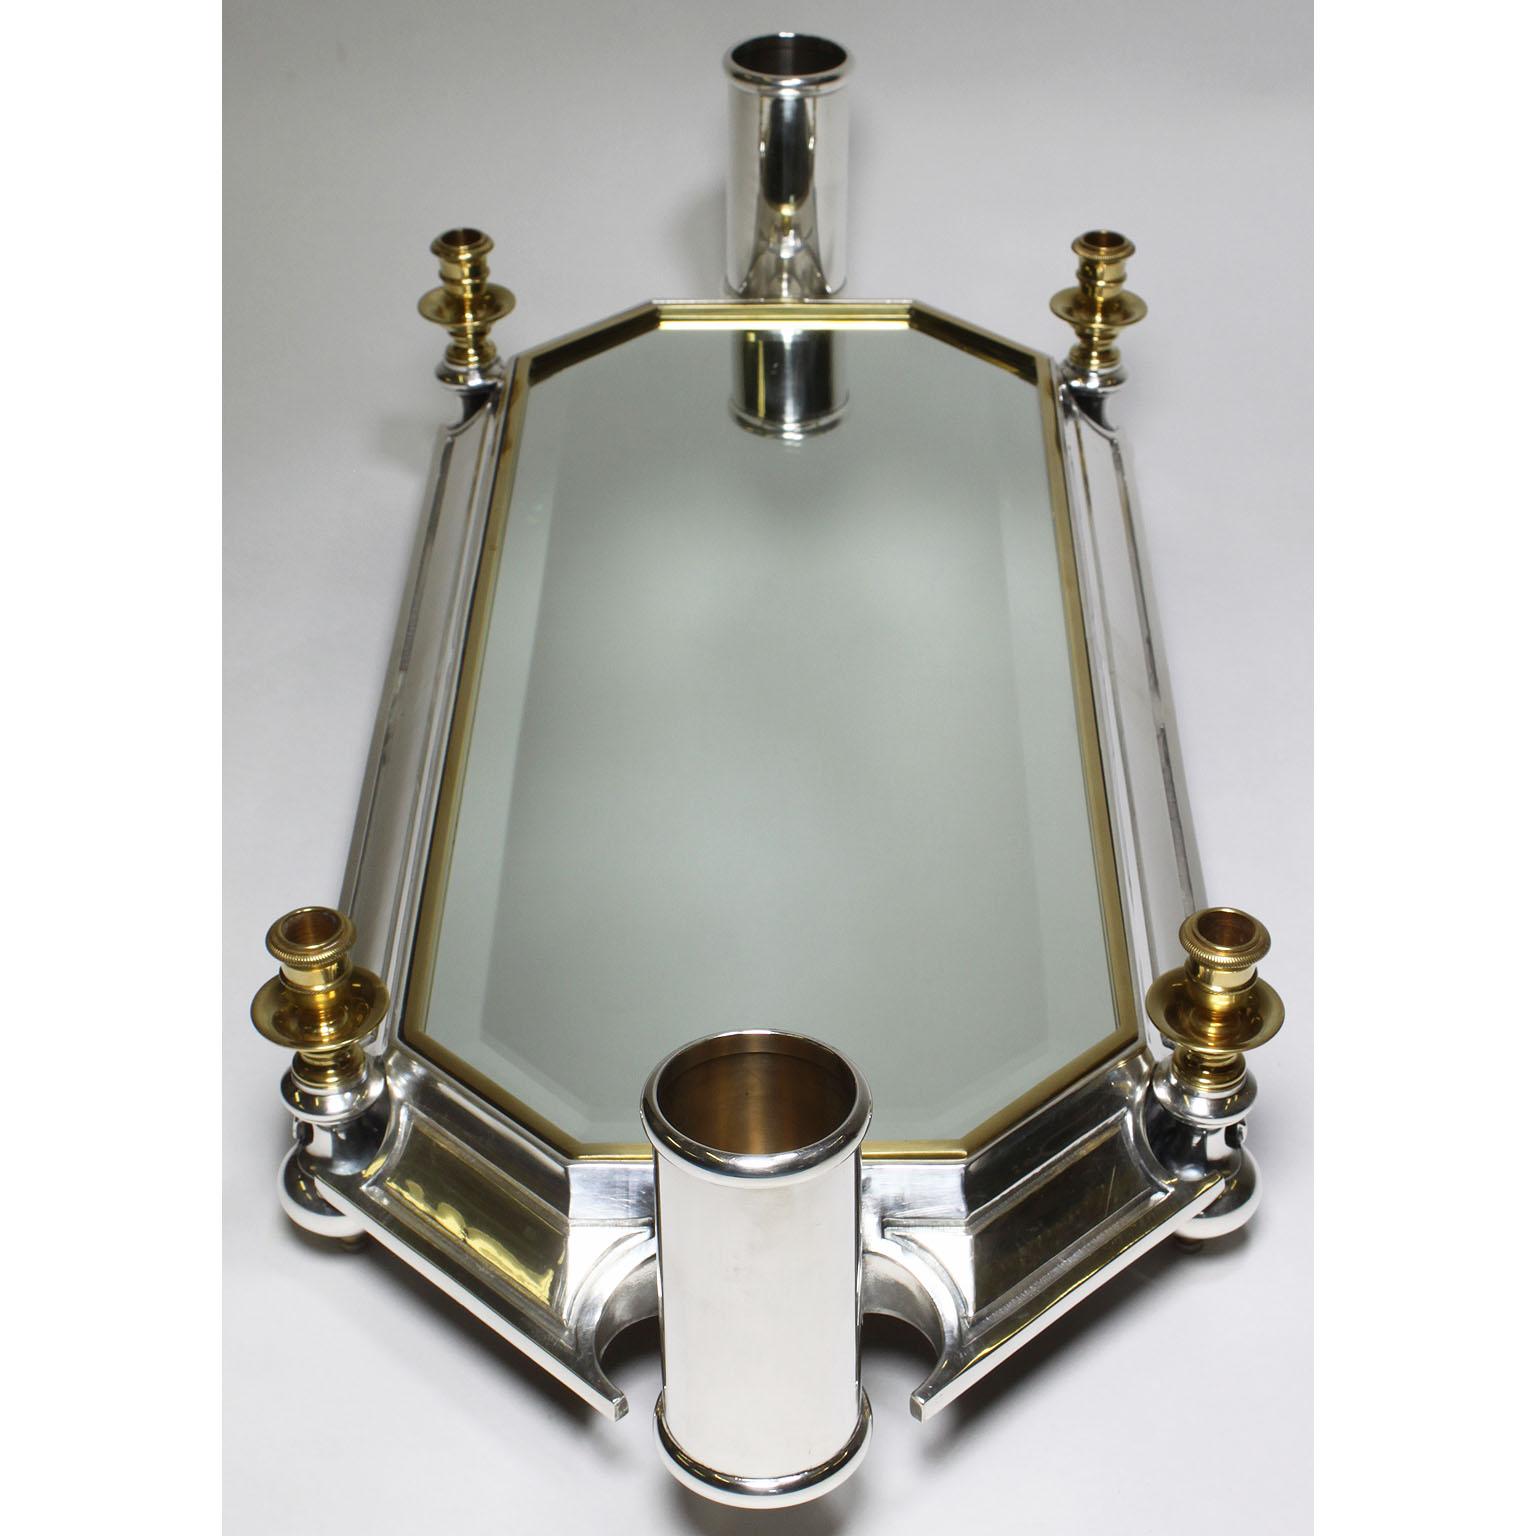 French 19th-20th Century Plated Surtout de Table Centerpice, Attributed to Christofle